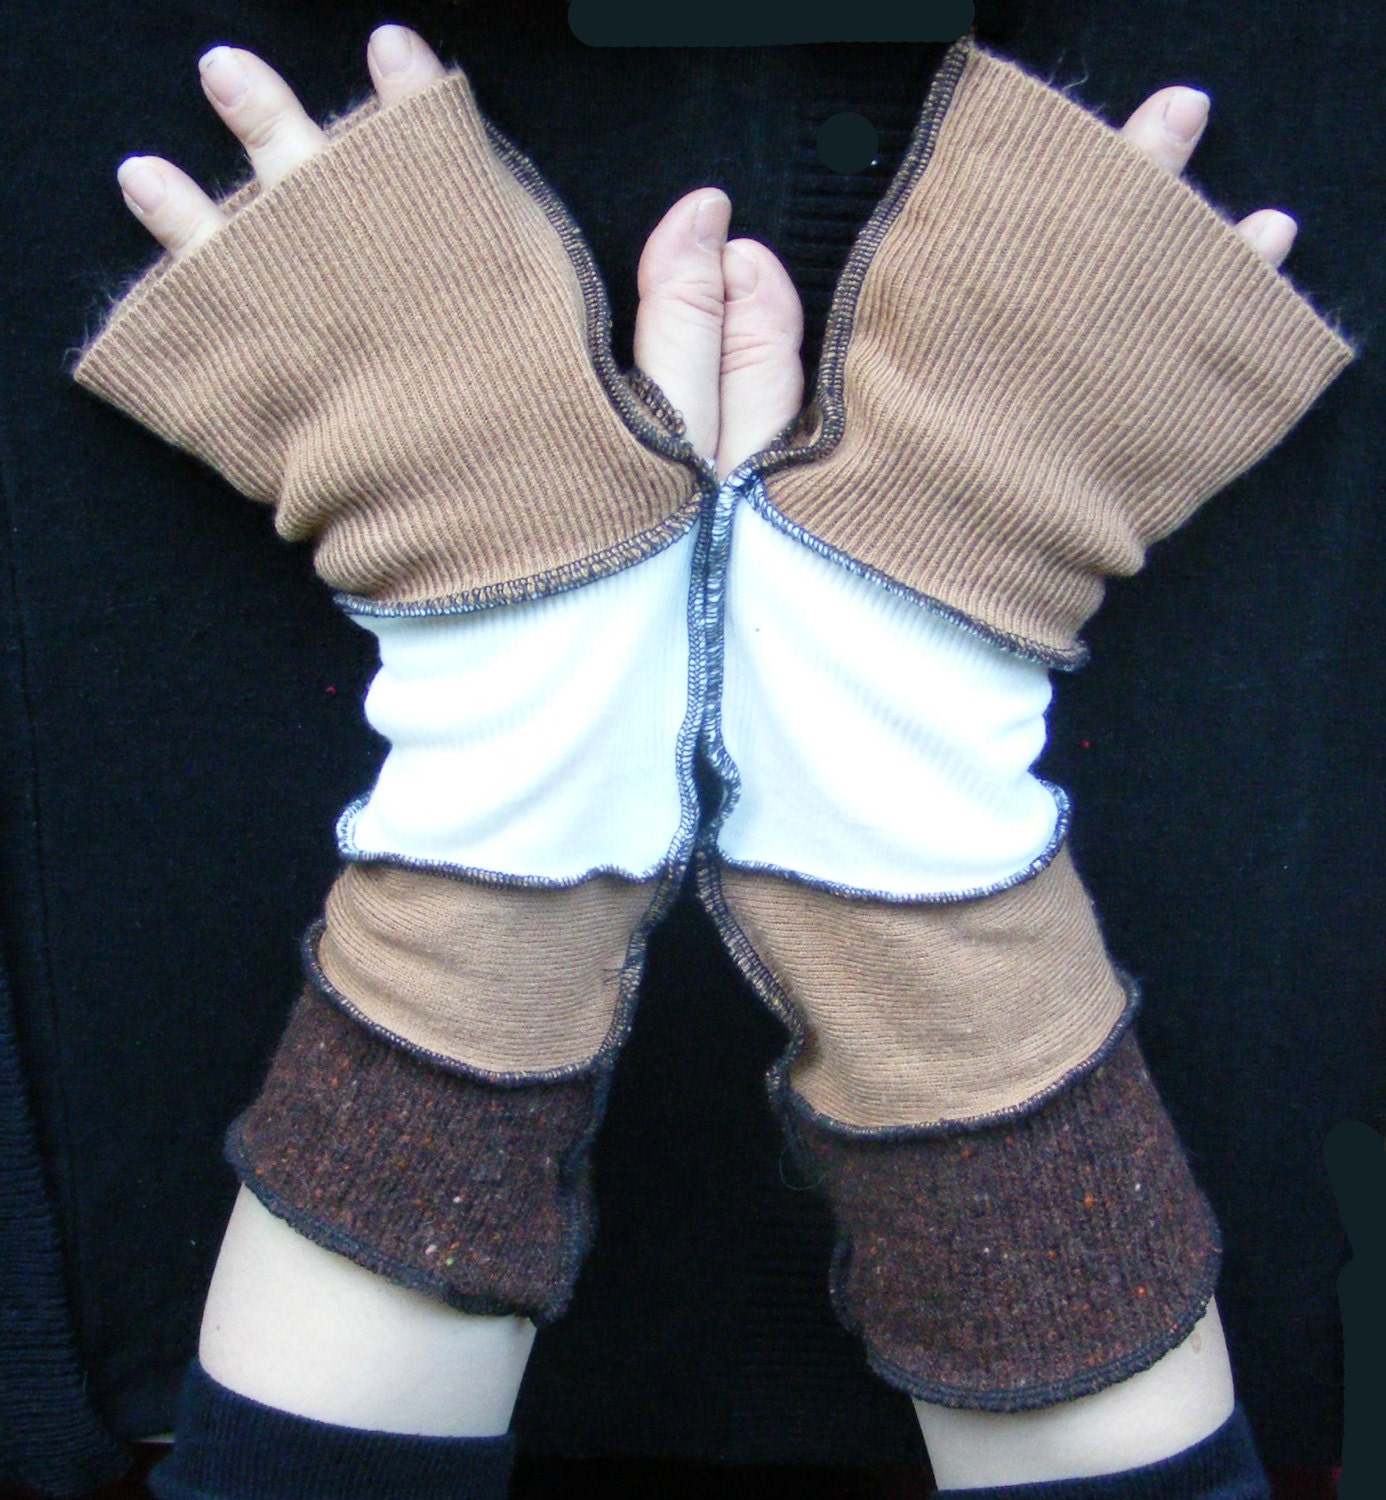 Fingerless Gloves Arm Warmers made from recycled jumpers sweaters - NicScolari